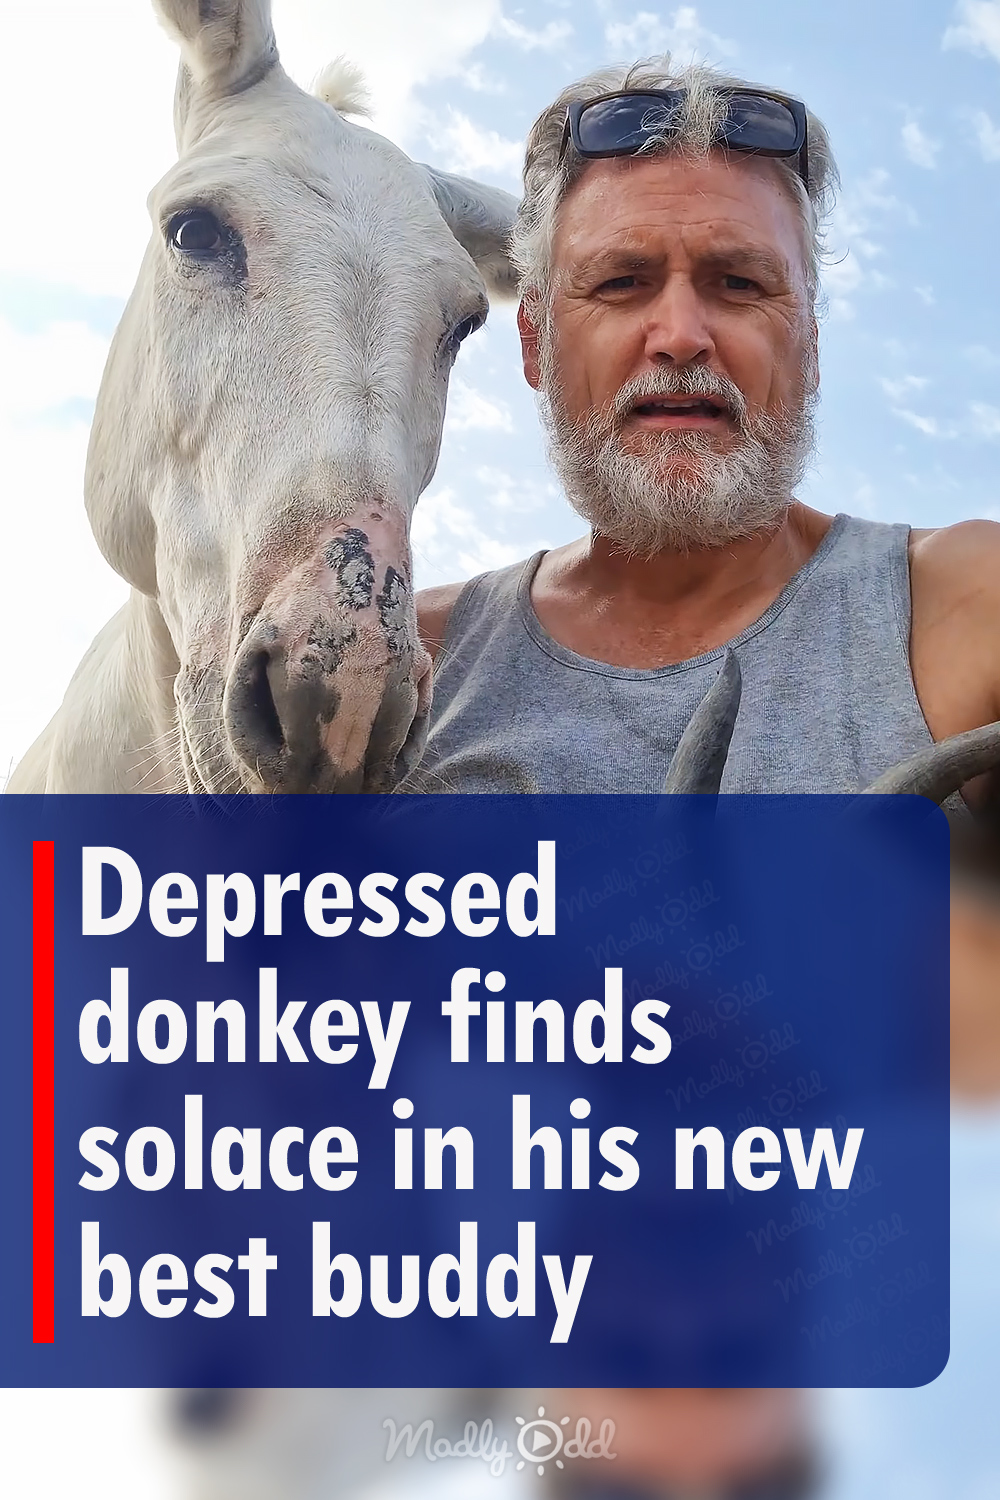 Depressed donkey finds solace in his new best buddy